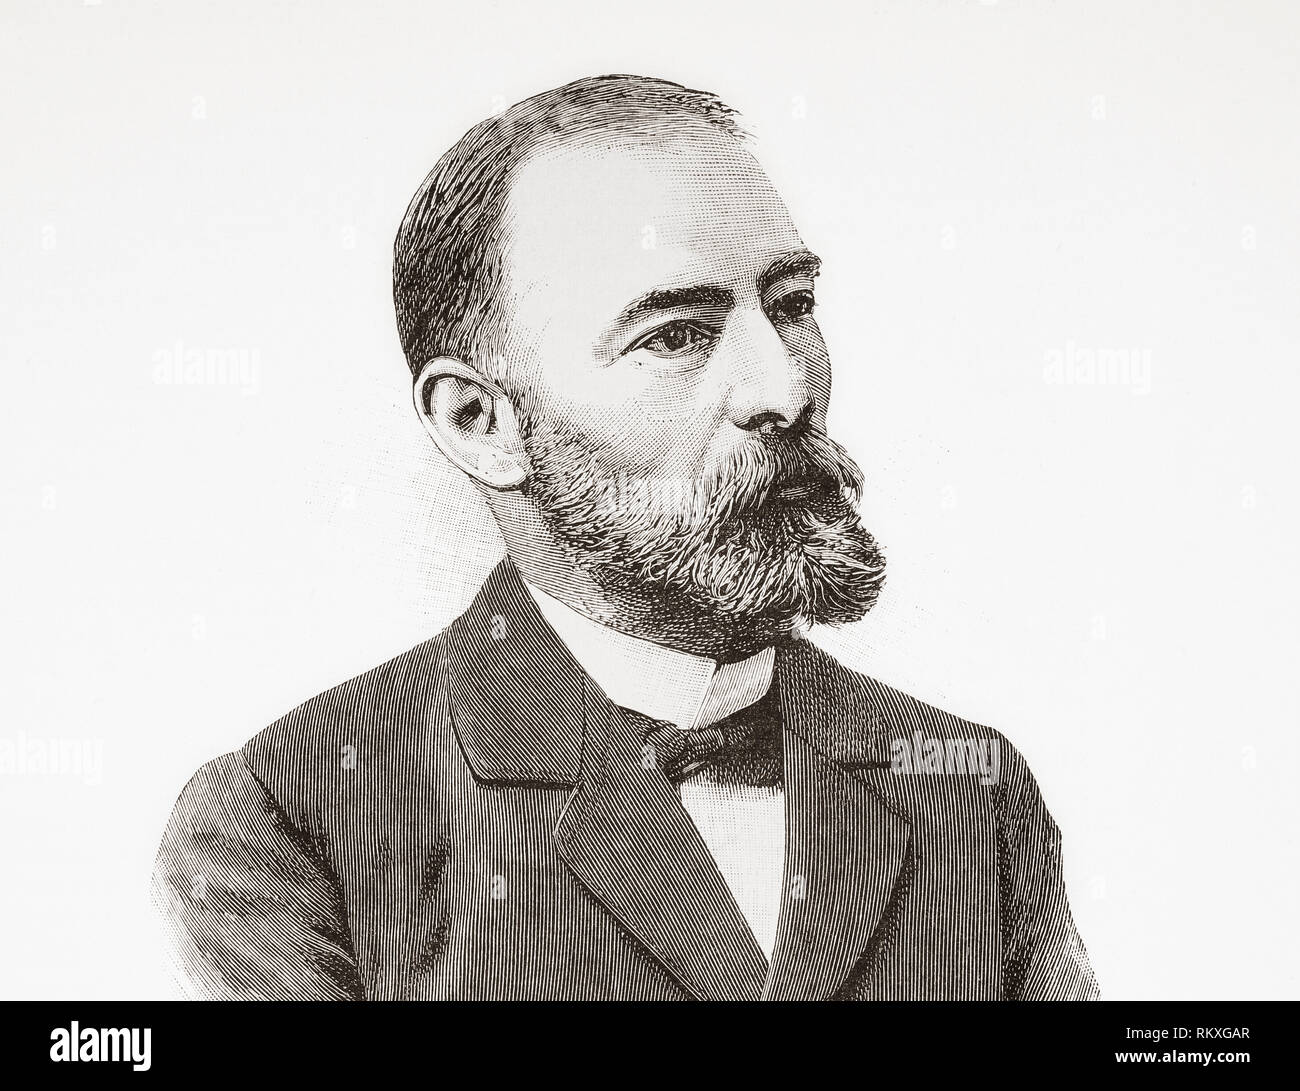 Alejandro San Martin y Satrustegui, 1847- 1908. Spanish physician and politician, Minister of Public Instruction and Fine Arts during the reign of Alfonso XIII.  From La Ilustracion Espanola y Americana, published 1892. Stock Photo